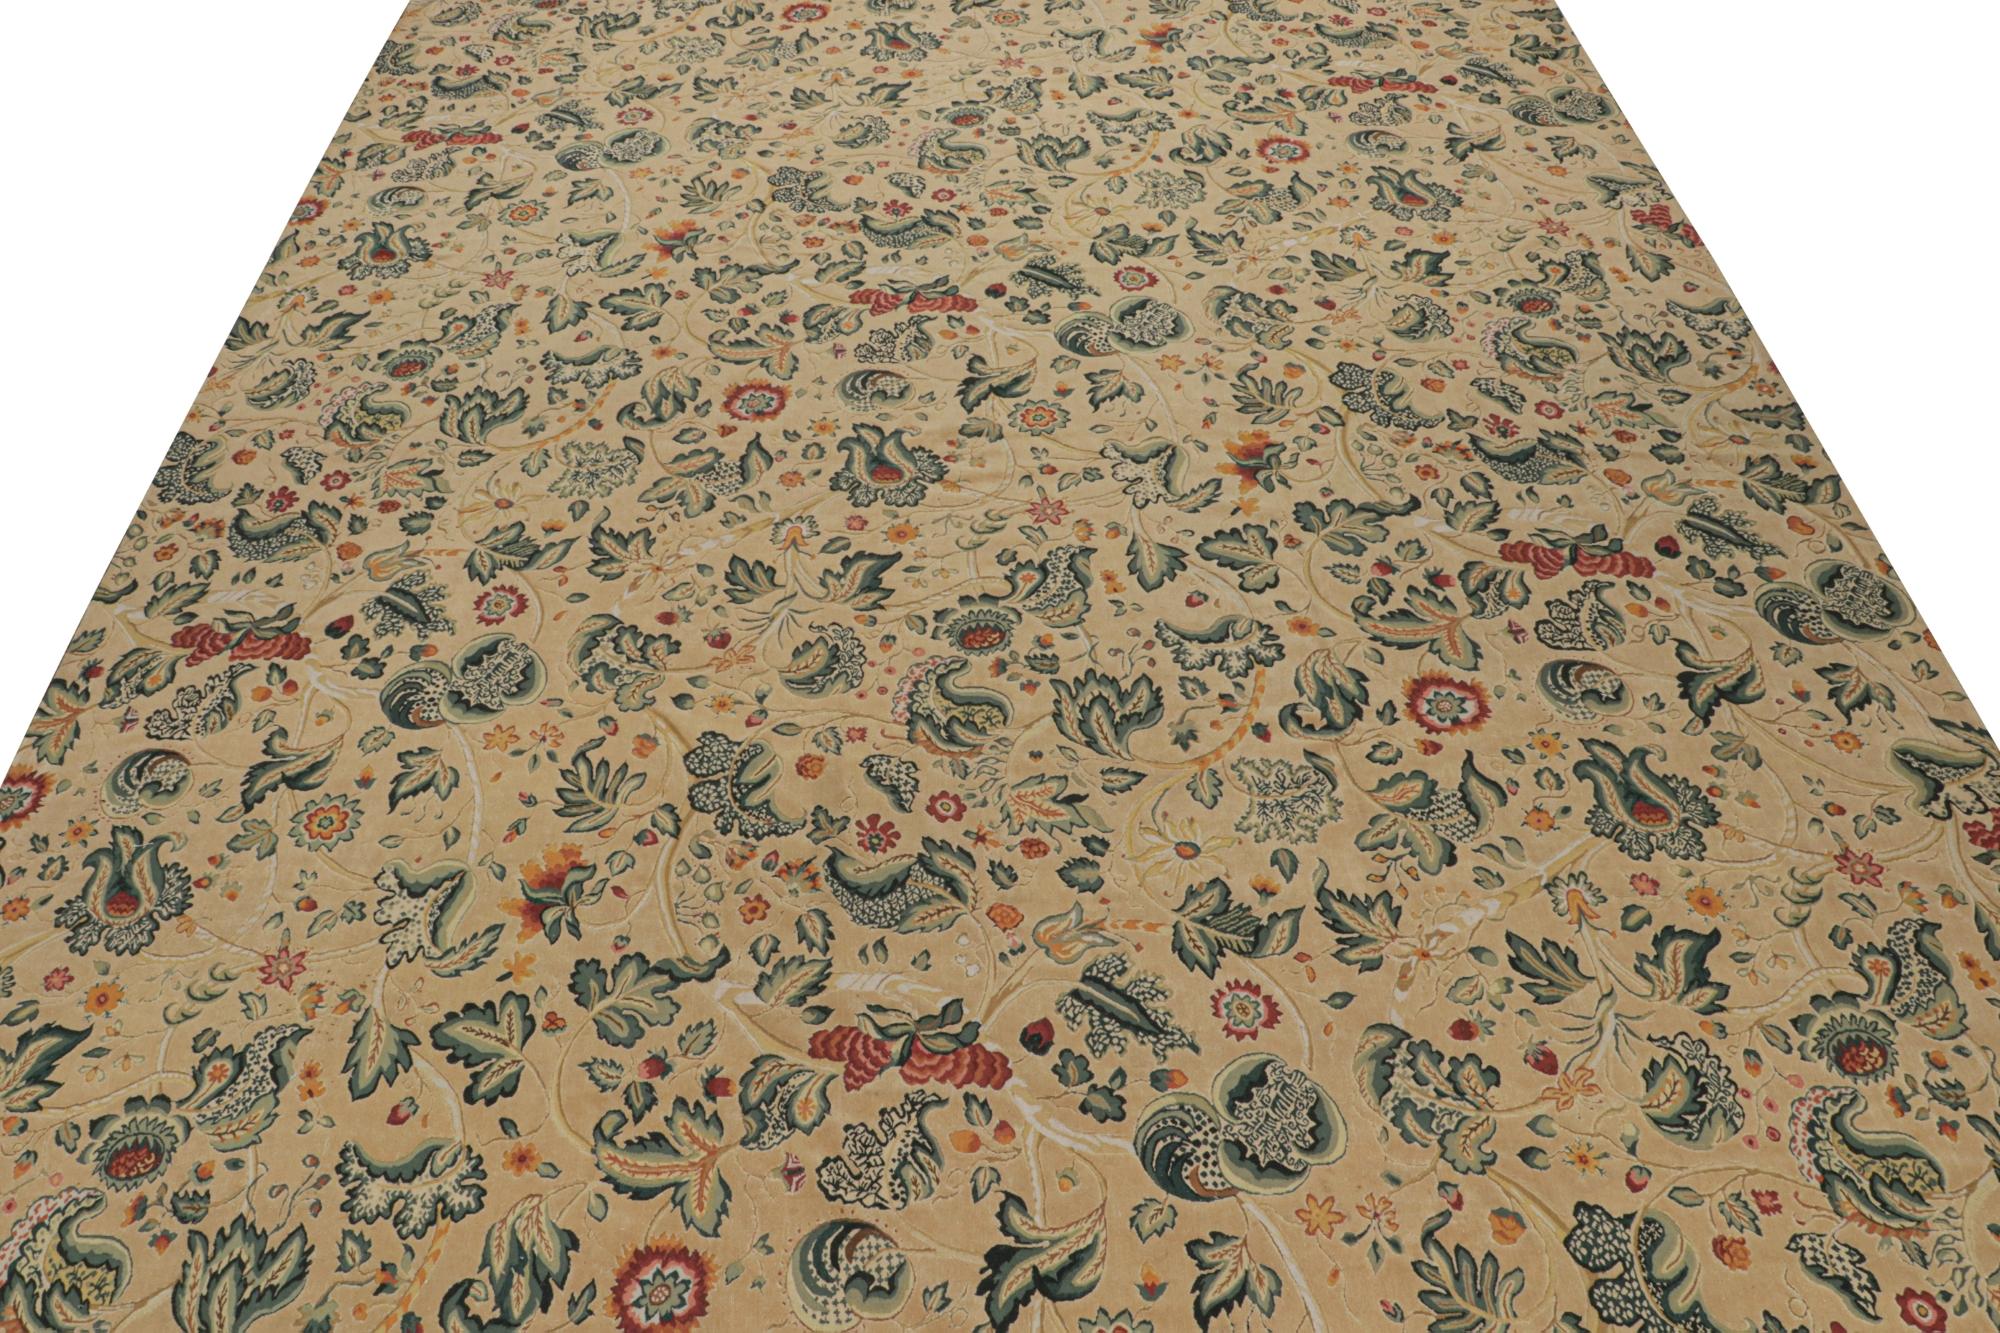 Rug & Kilim’s European Tudor Style Flatweave in Beige with Teal Floral Pattern In New Condition For Sale In Long Island City, NY